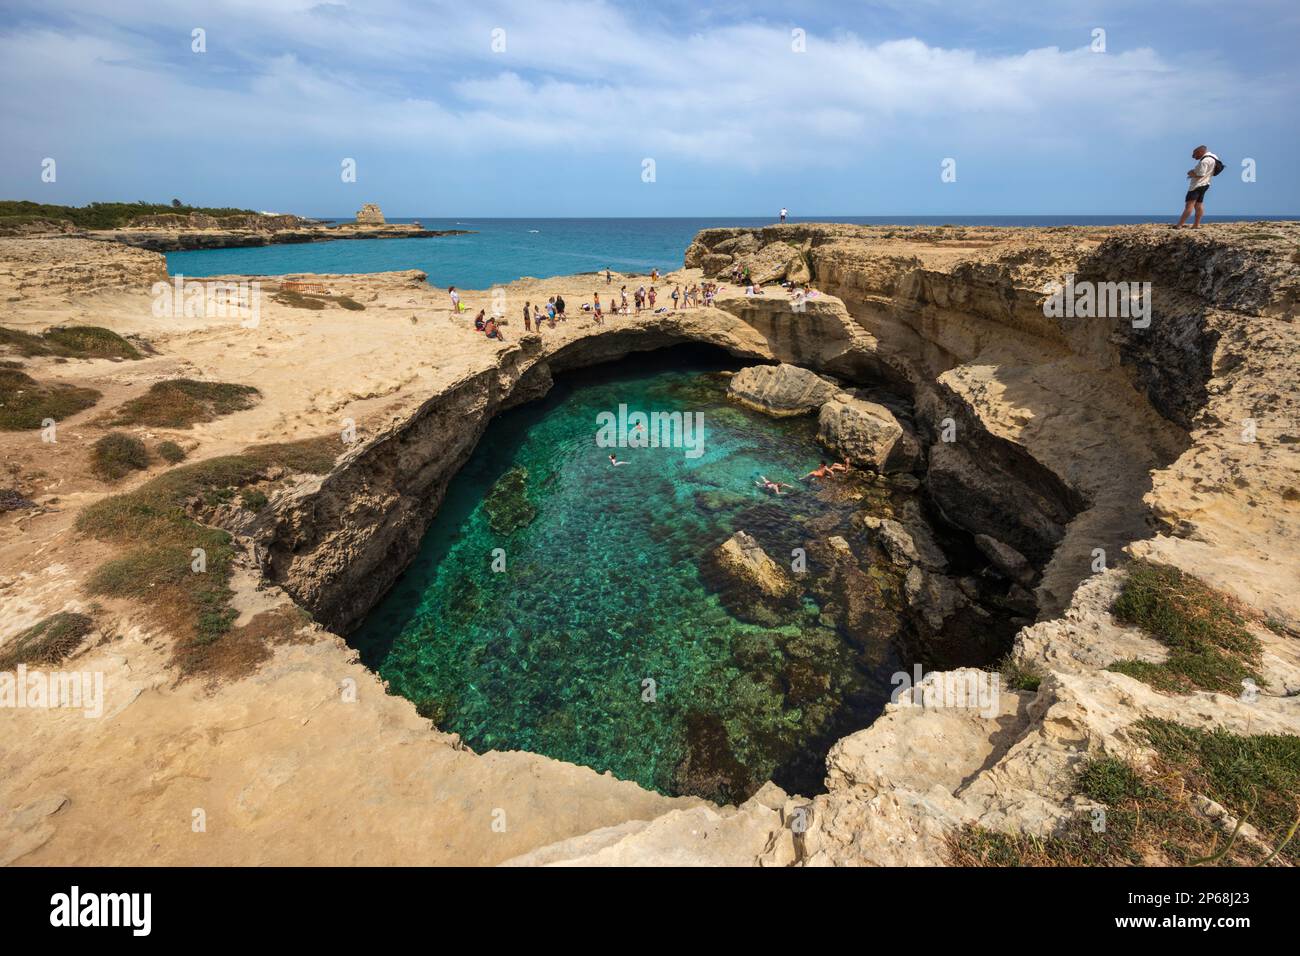 Grotta della Poesia (Poetry Cave) natural pool among karsk formations, Roca archaeological site, near Melendugno, Puglia, Italy, Europe Stock Photo